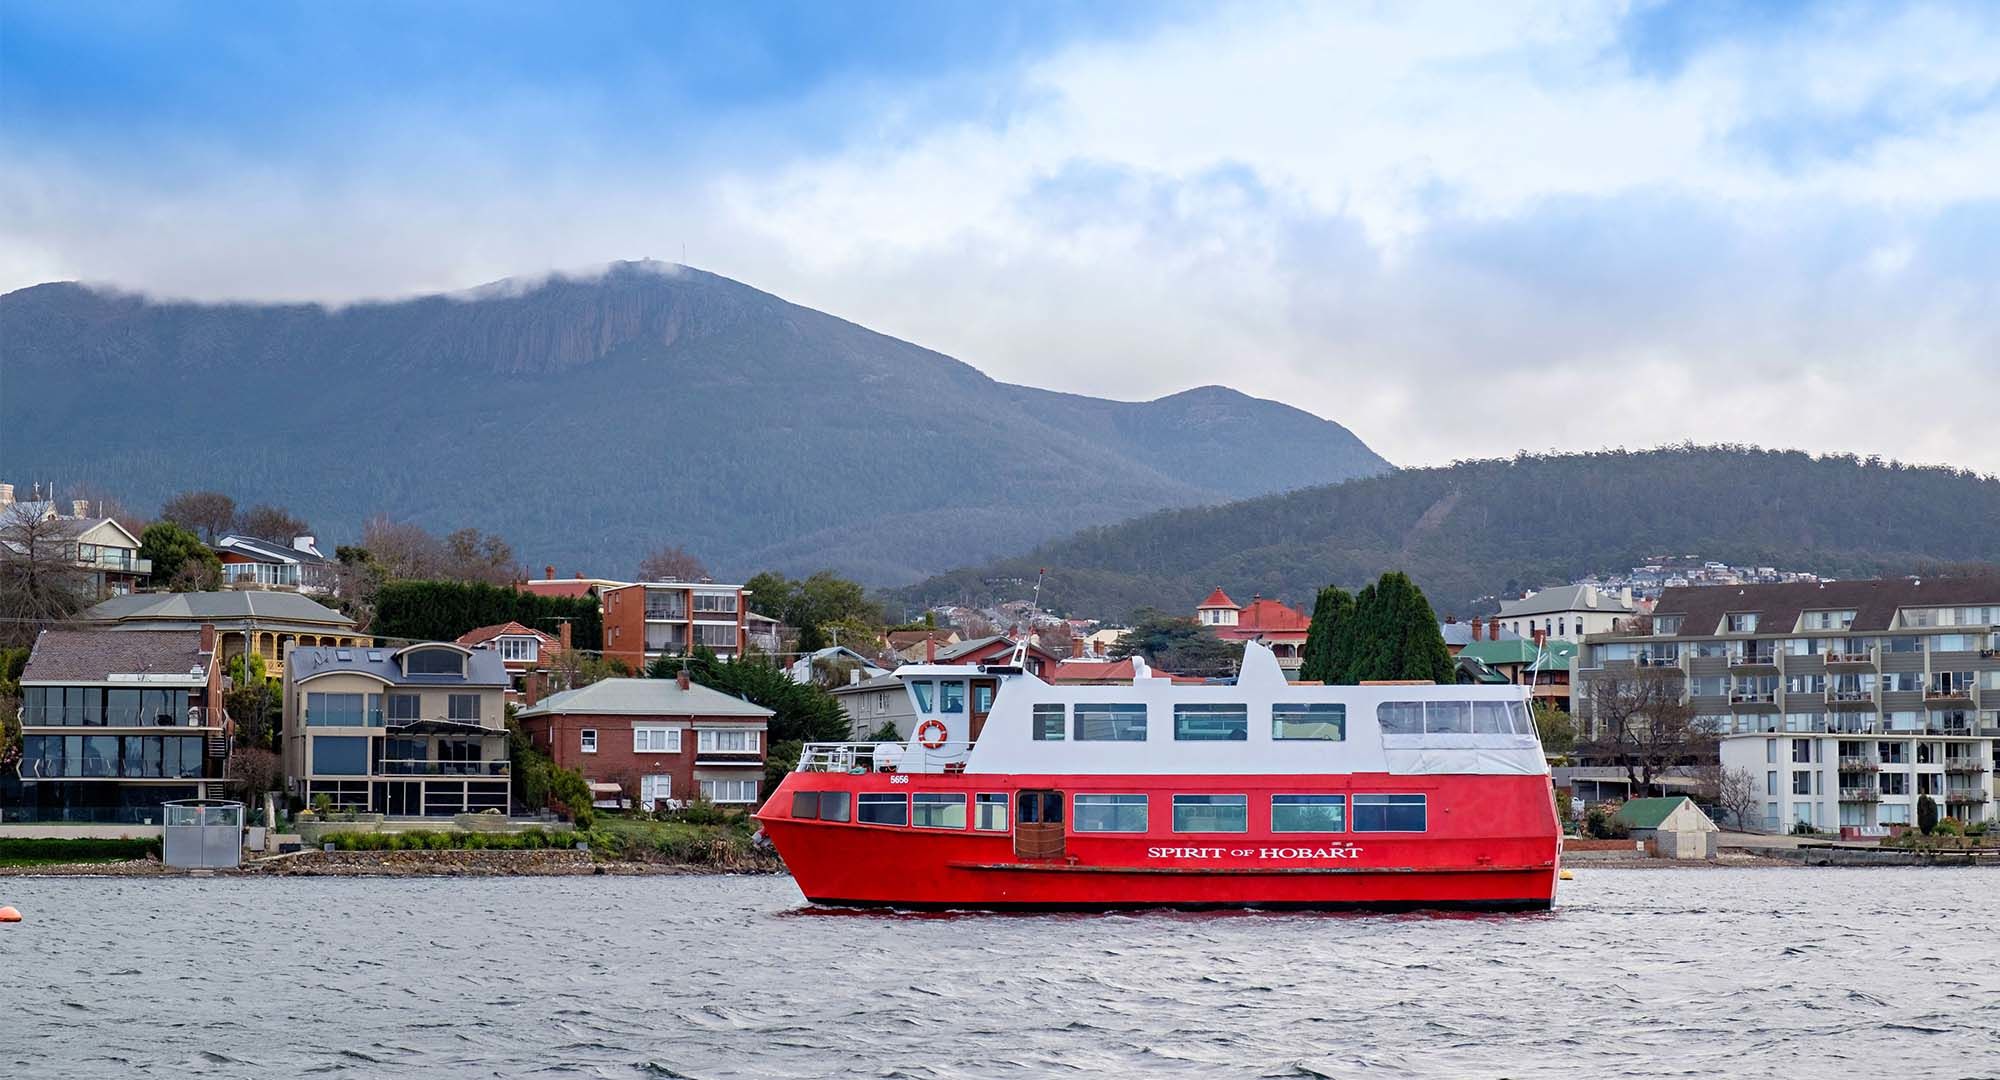 boat tours out of hobart